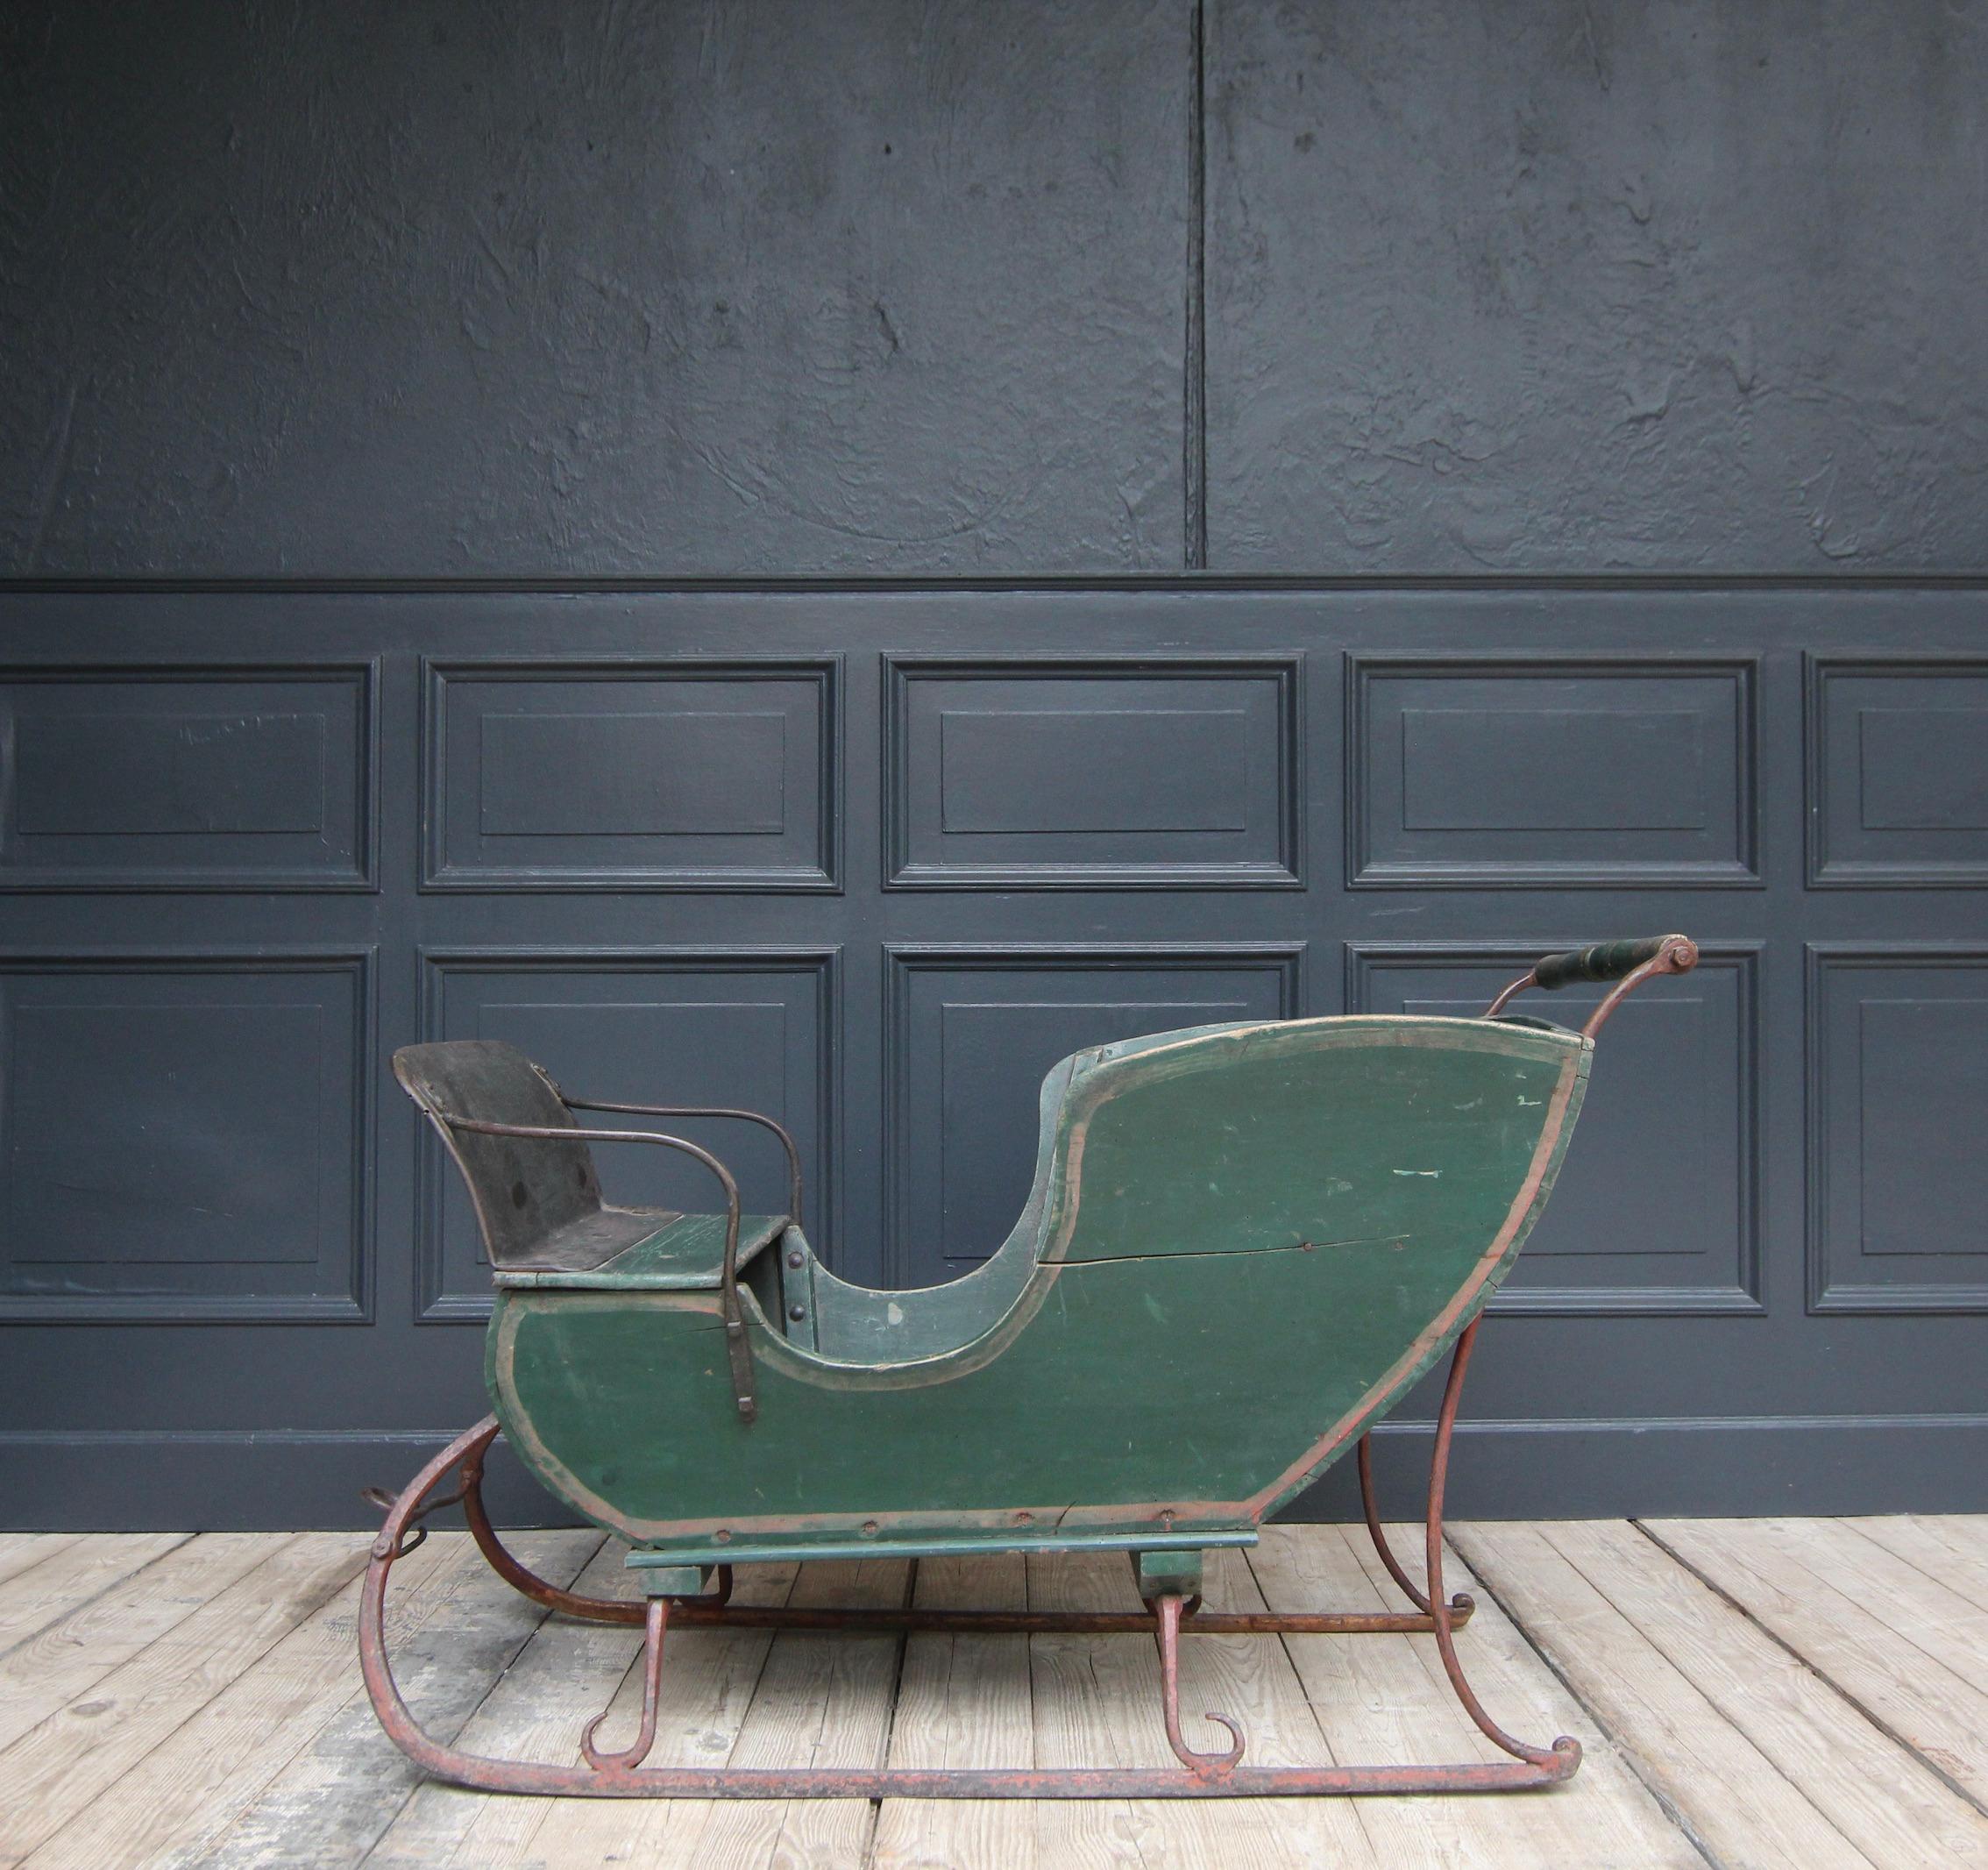 Decorative children's sledge or ice sledge from around 1900.

Made of painted wood and wrought iron.

For 3-4 children. Could be steered with the rear bar and pulled by a pony, billy goat or dog at the front.

Dimensions: 
68.5 cm or 77 cm high /